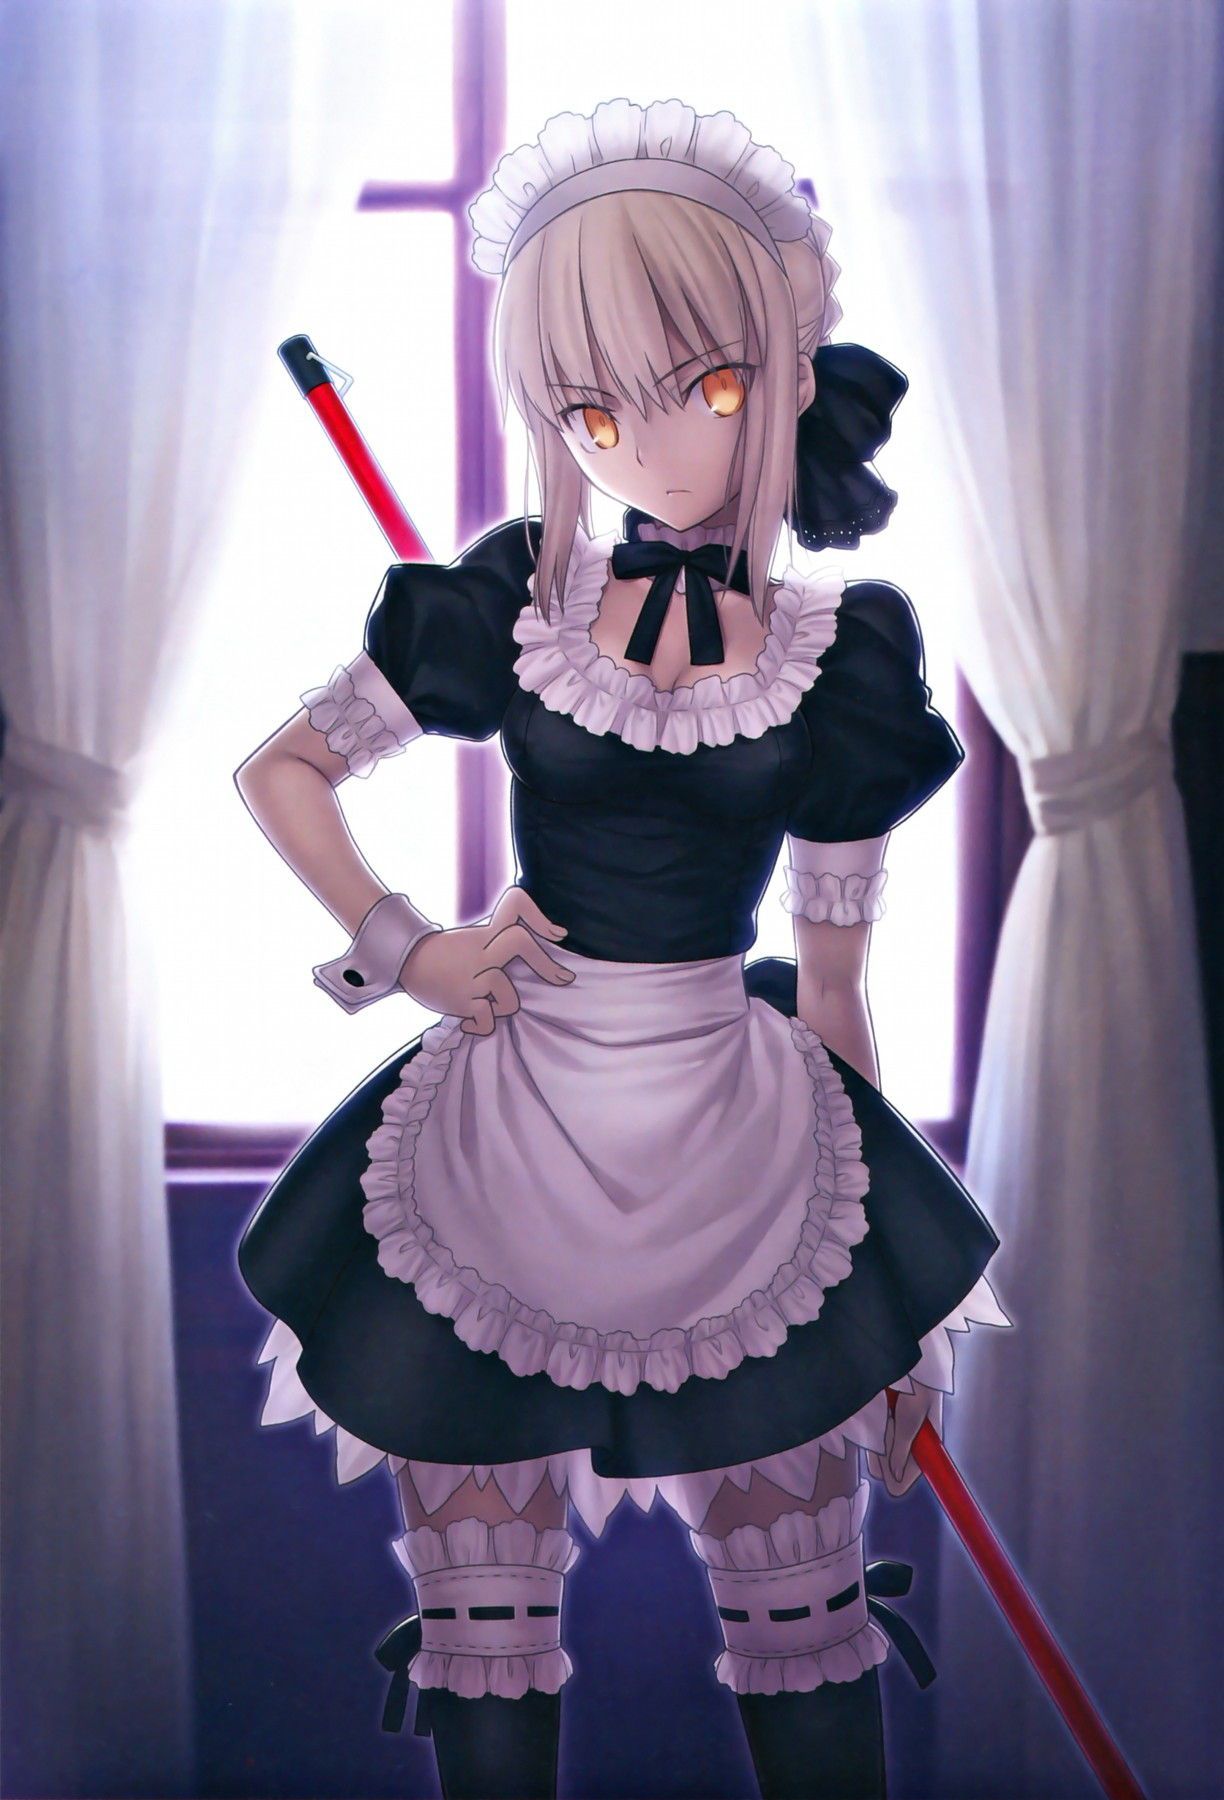 The secondary daughter who wears the maid clothes makes it want to bully carelessly, wwwwwwwww 8